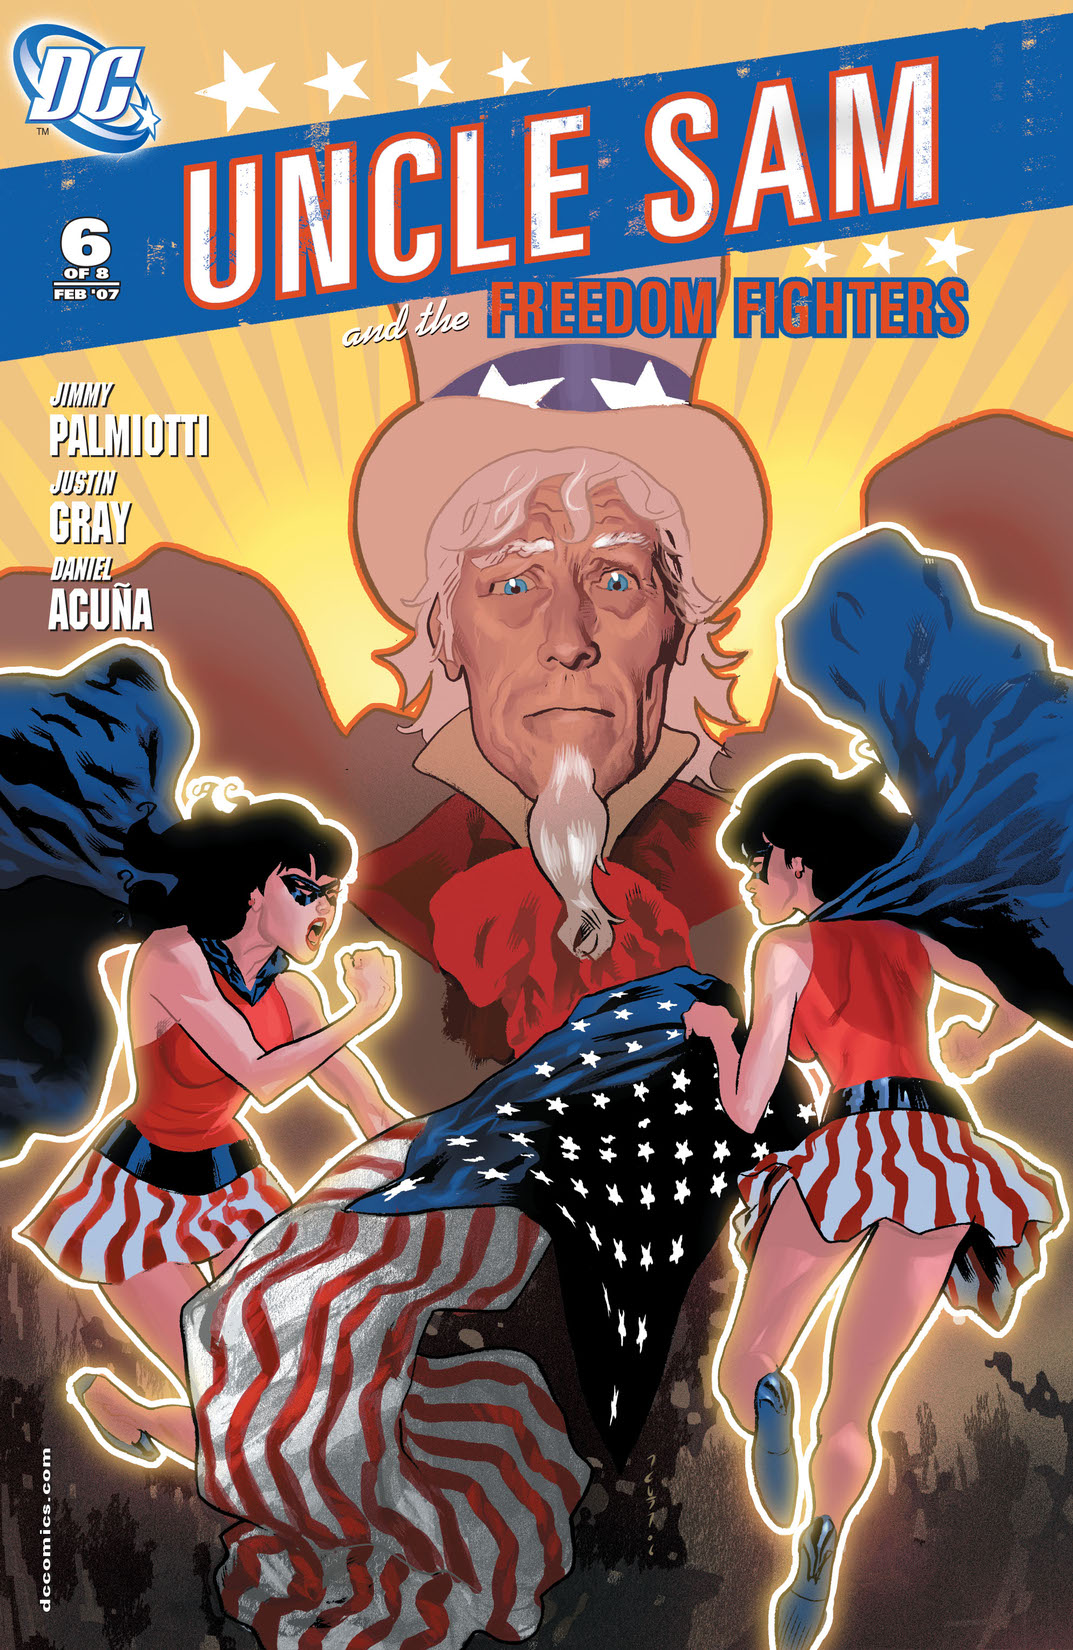 Uncle Sam and the Freedom Fighters (2006-) #6 preview images